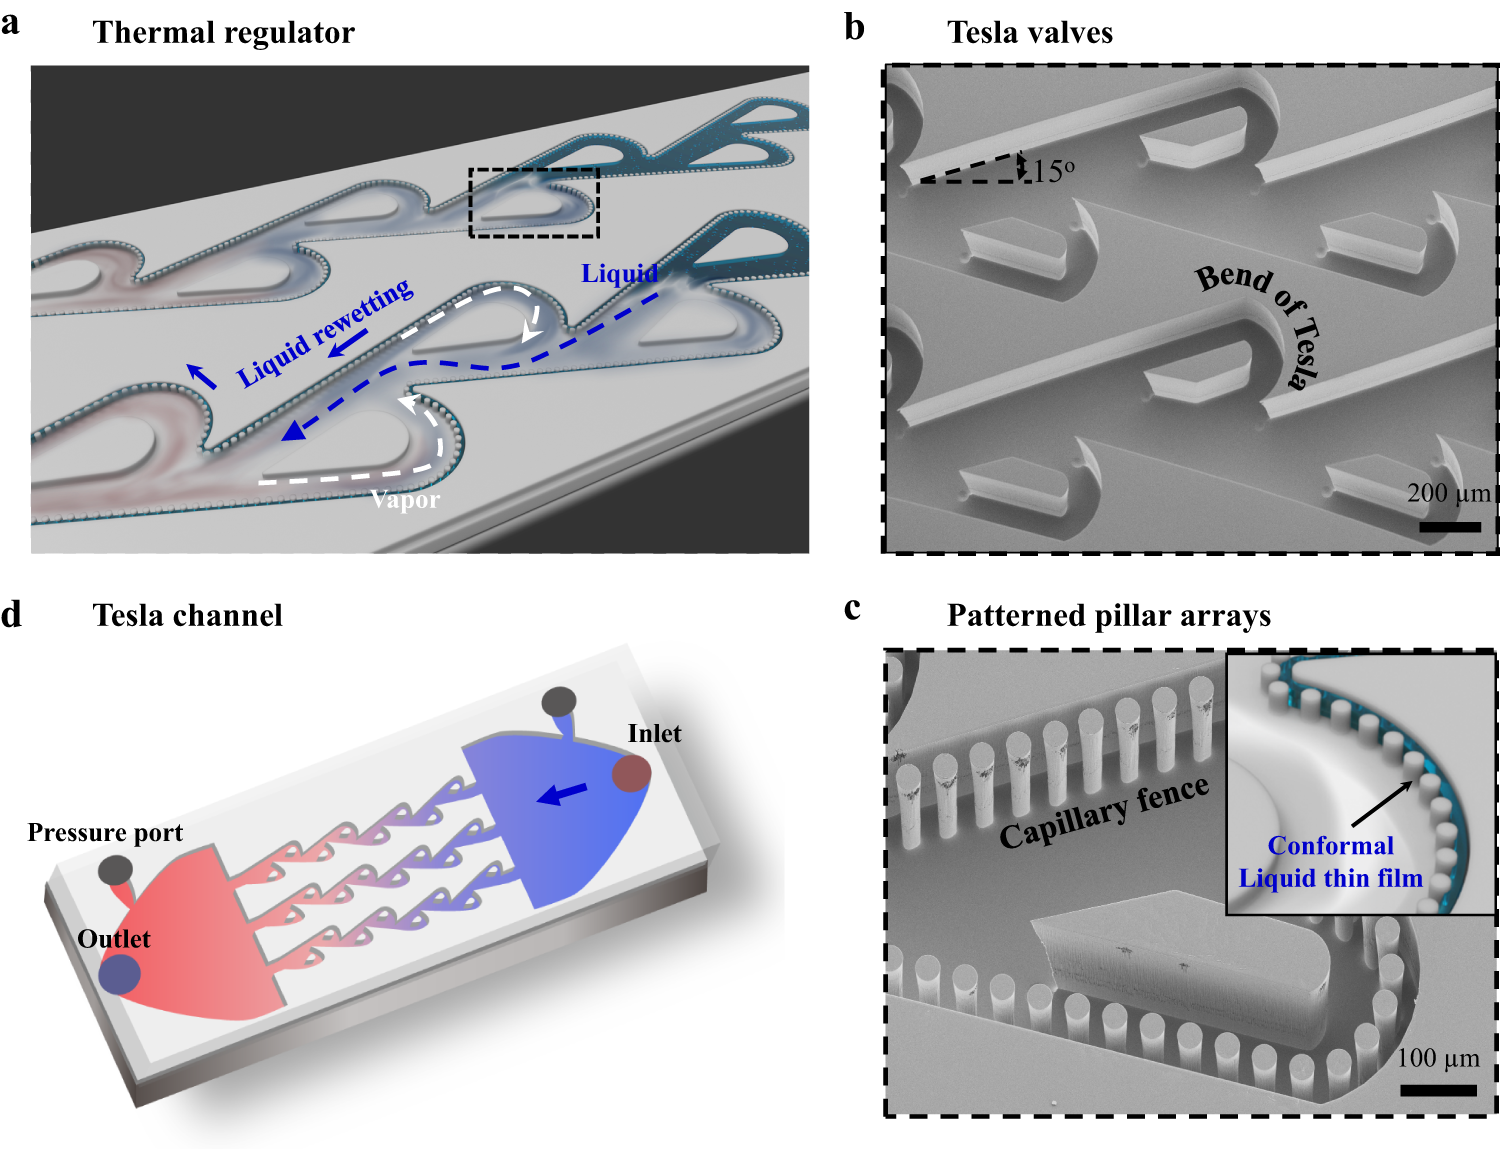 Tesla valves and capillary structures-activated thermal regulator Nature Communications